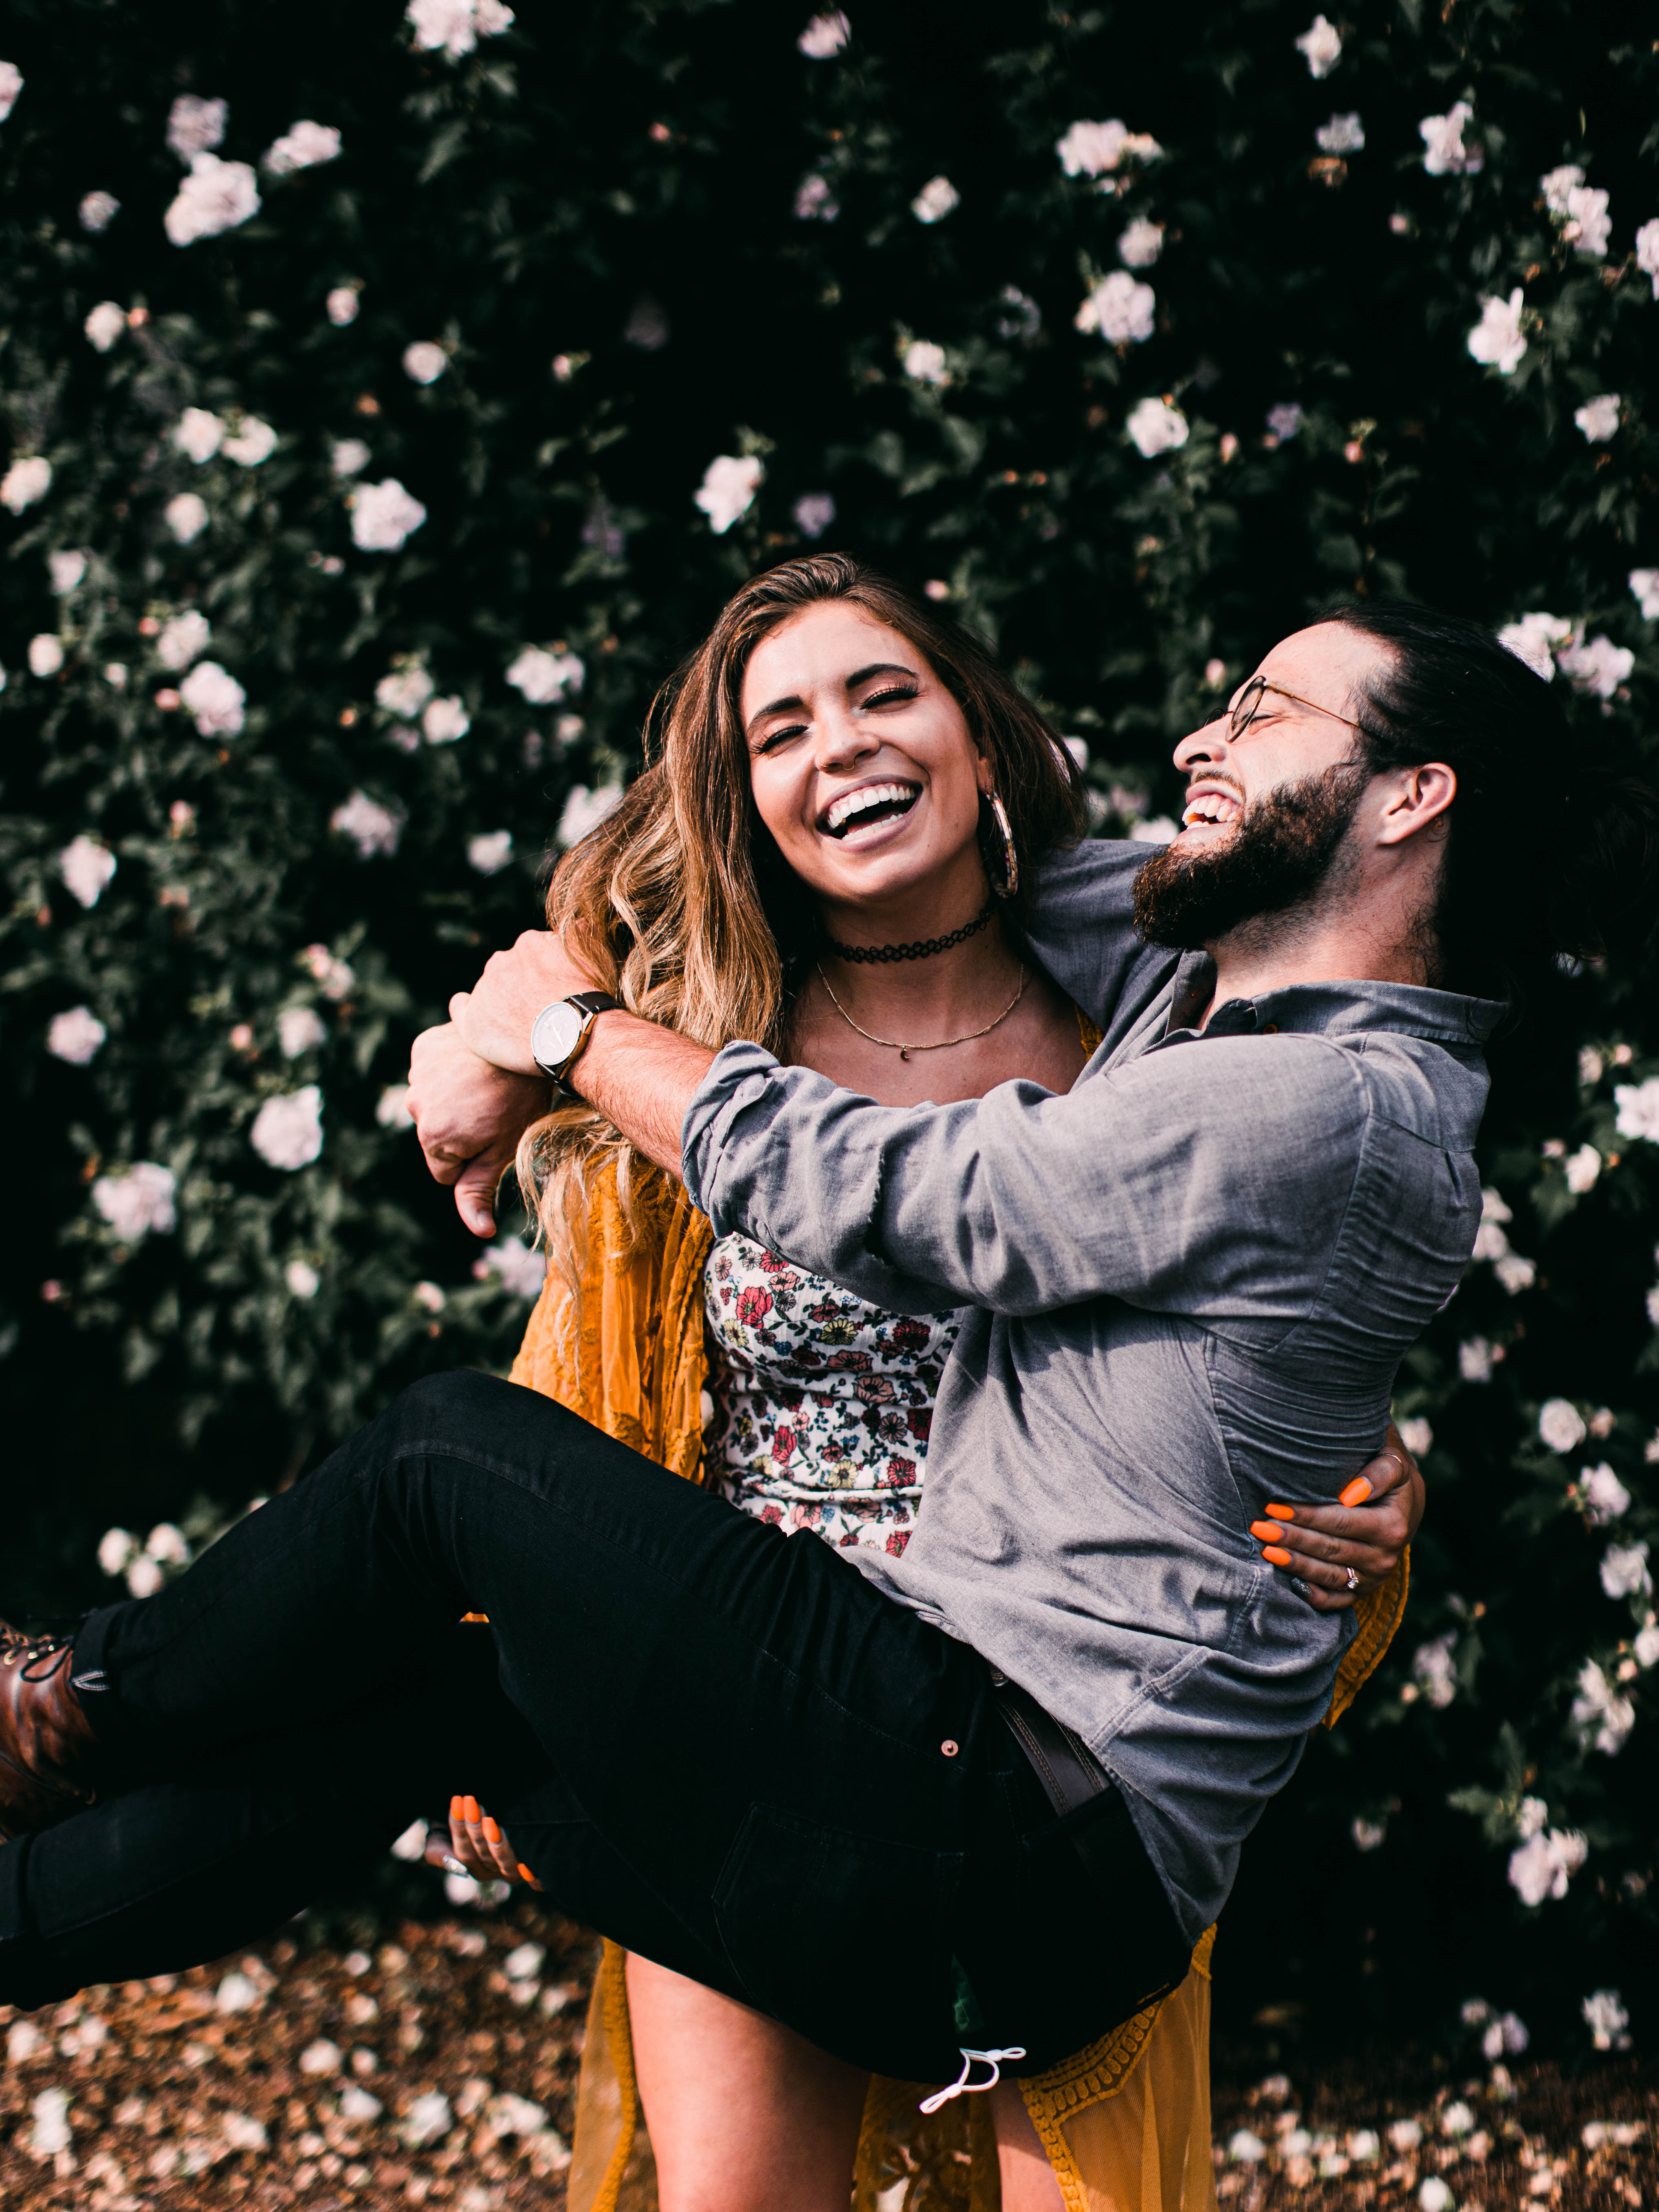 A couple laughing. | Source: Unsplash